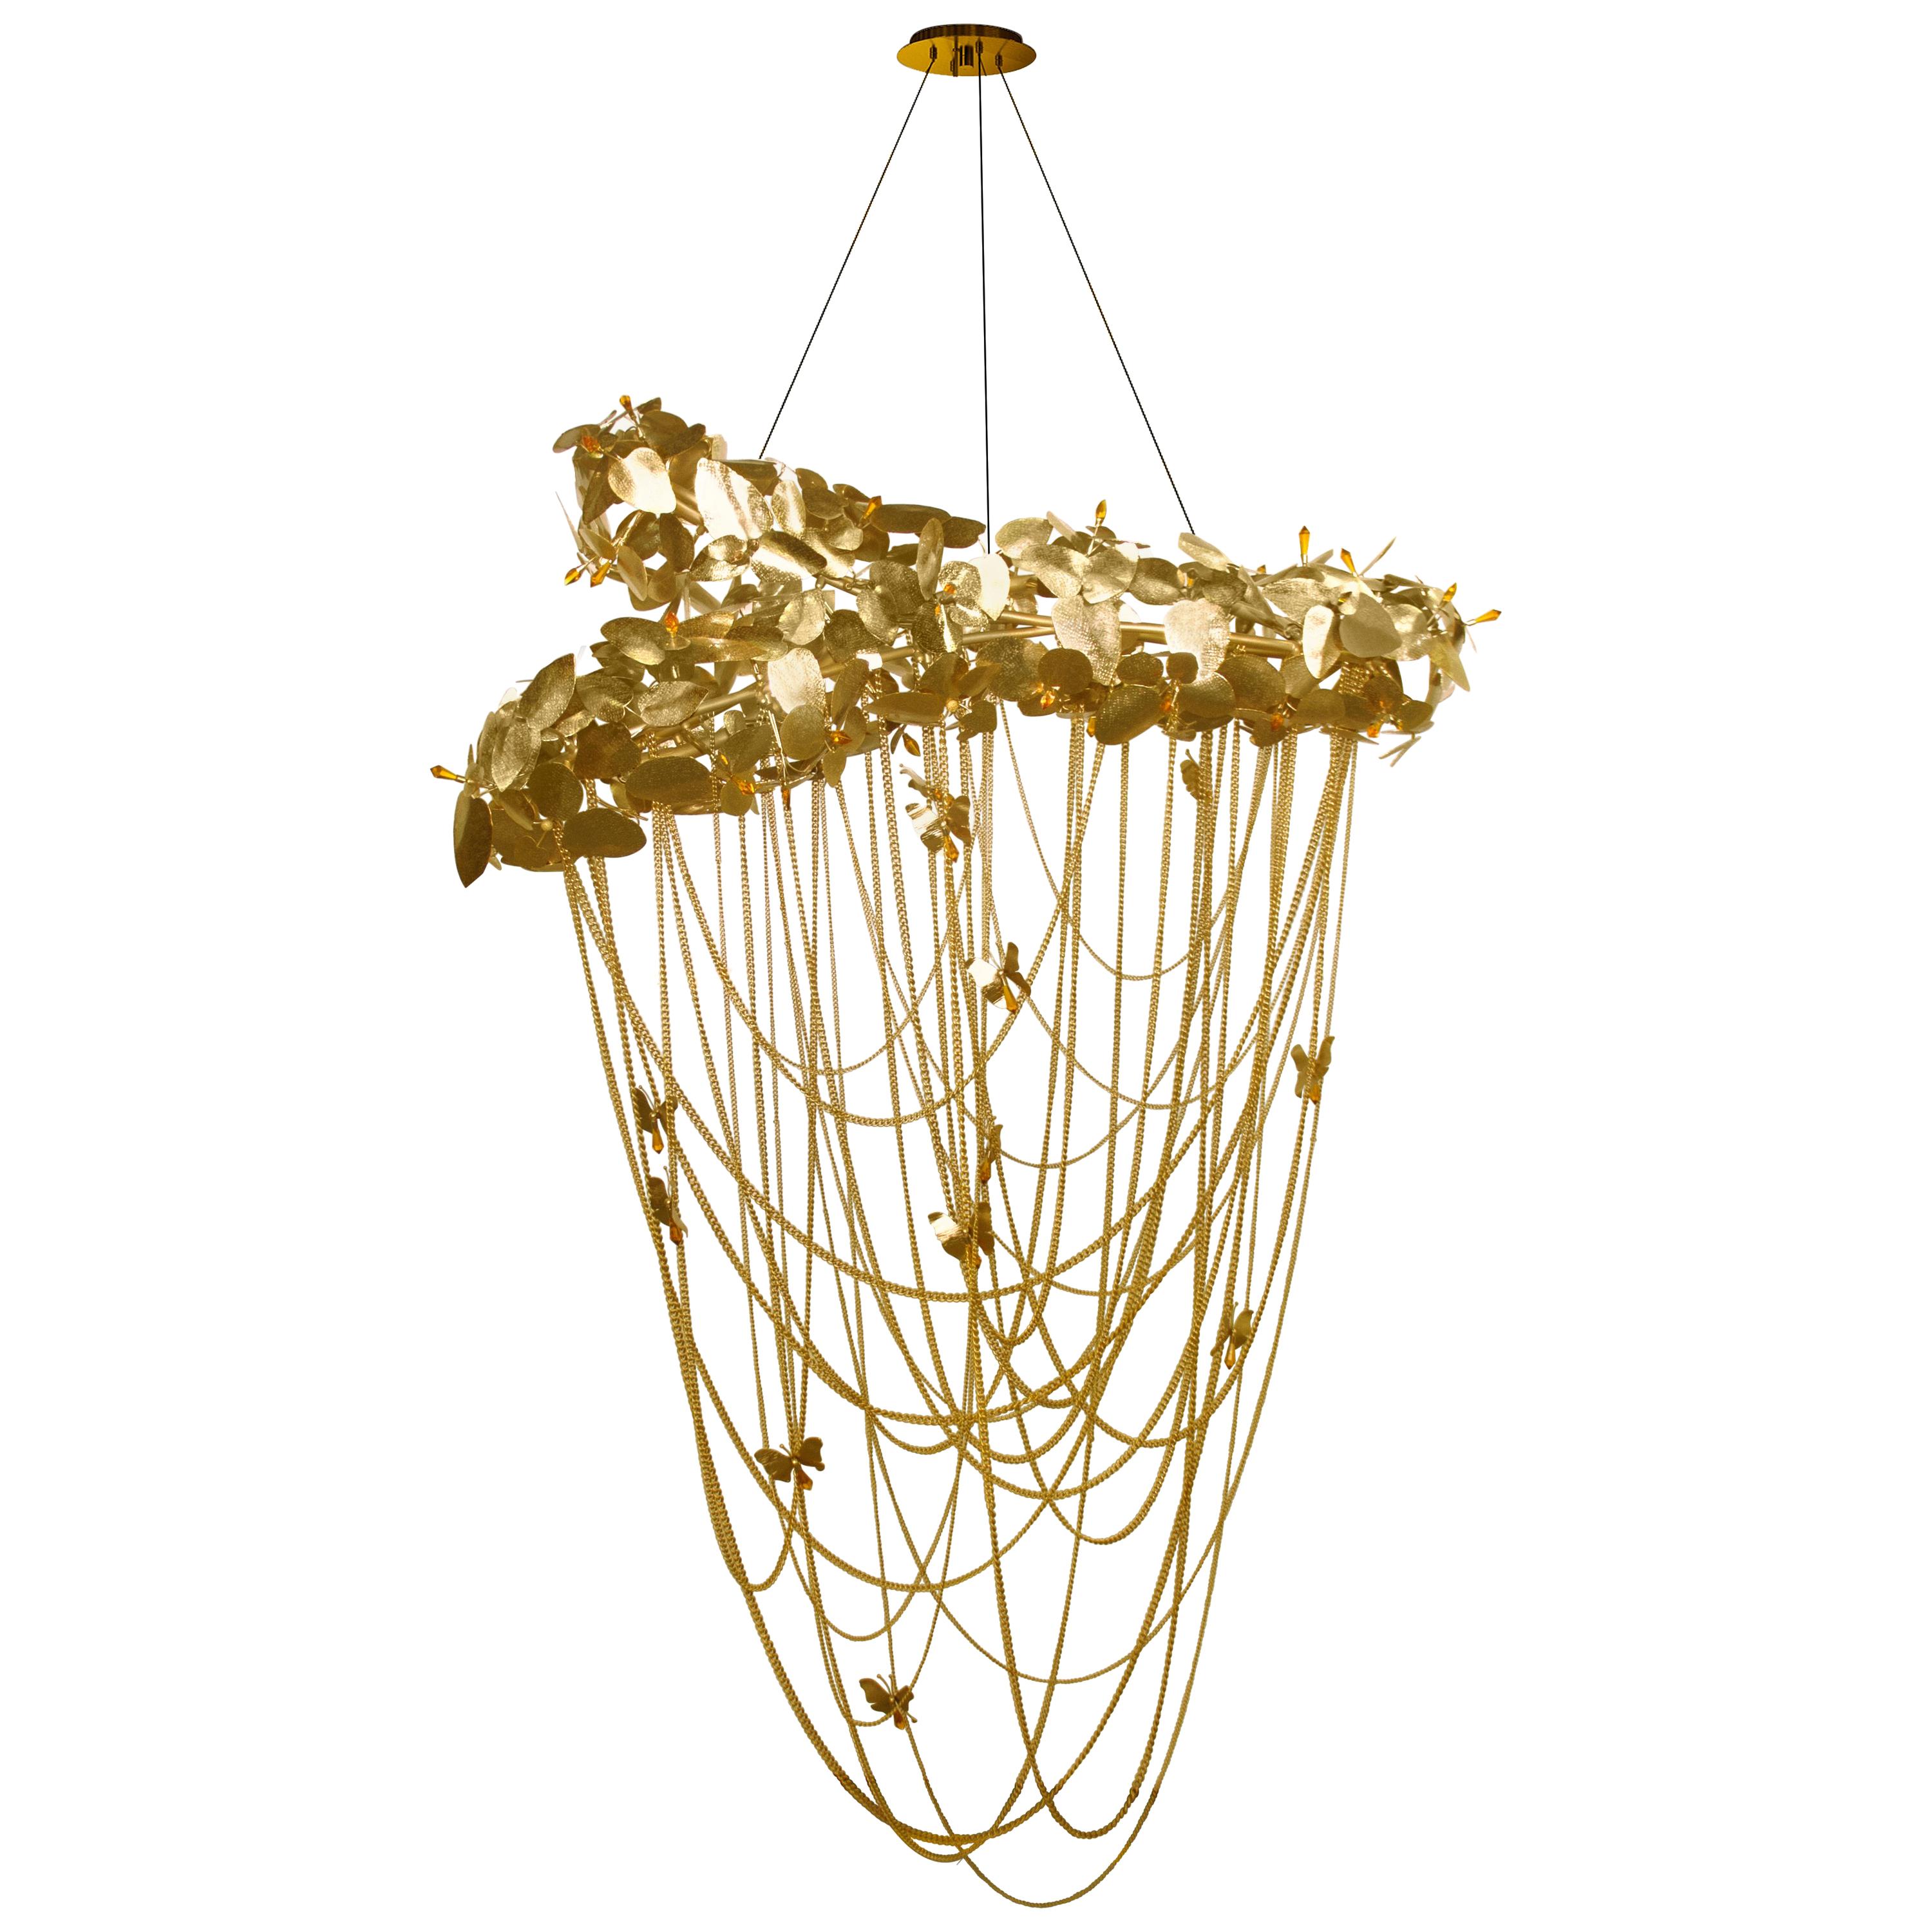 McQueen Chandelier in Gold Plated Brass with Amber Swarovski Crystals by Luxxu For Sale